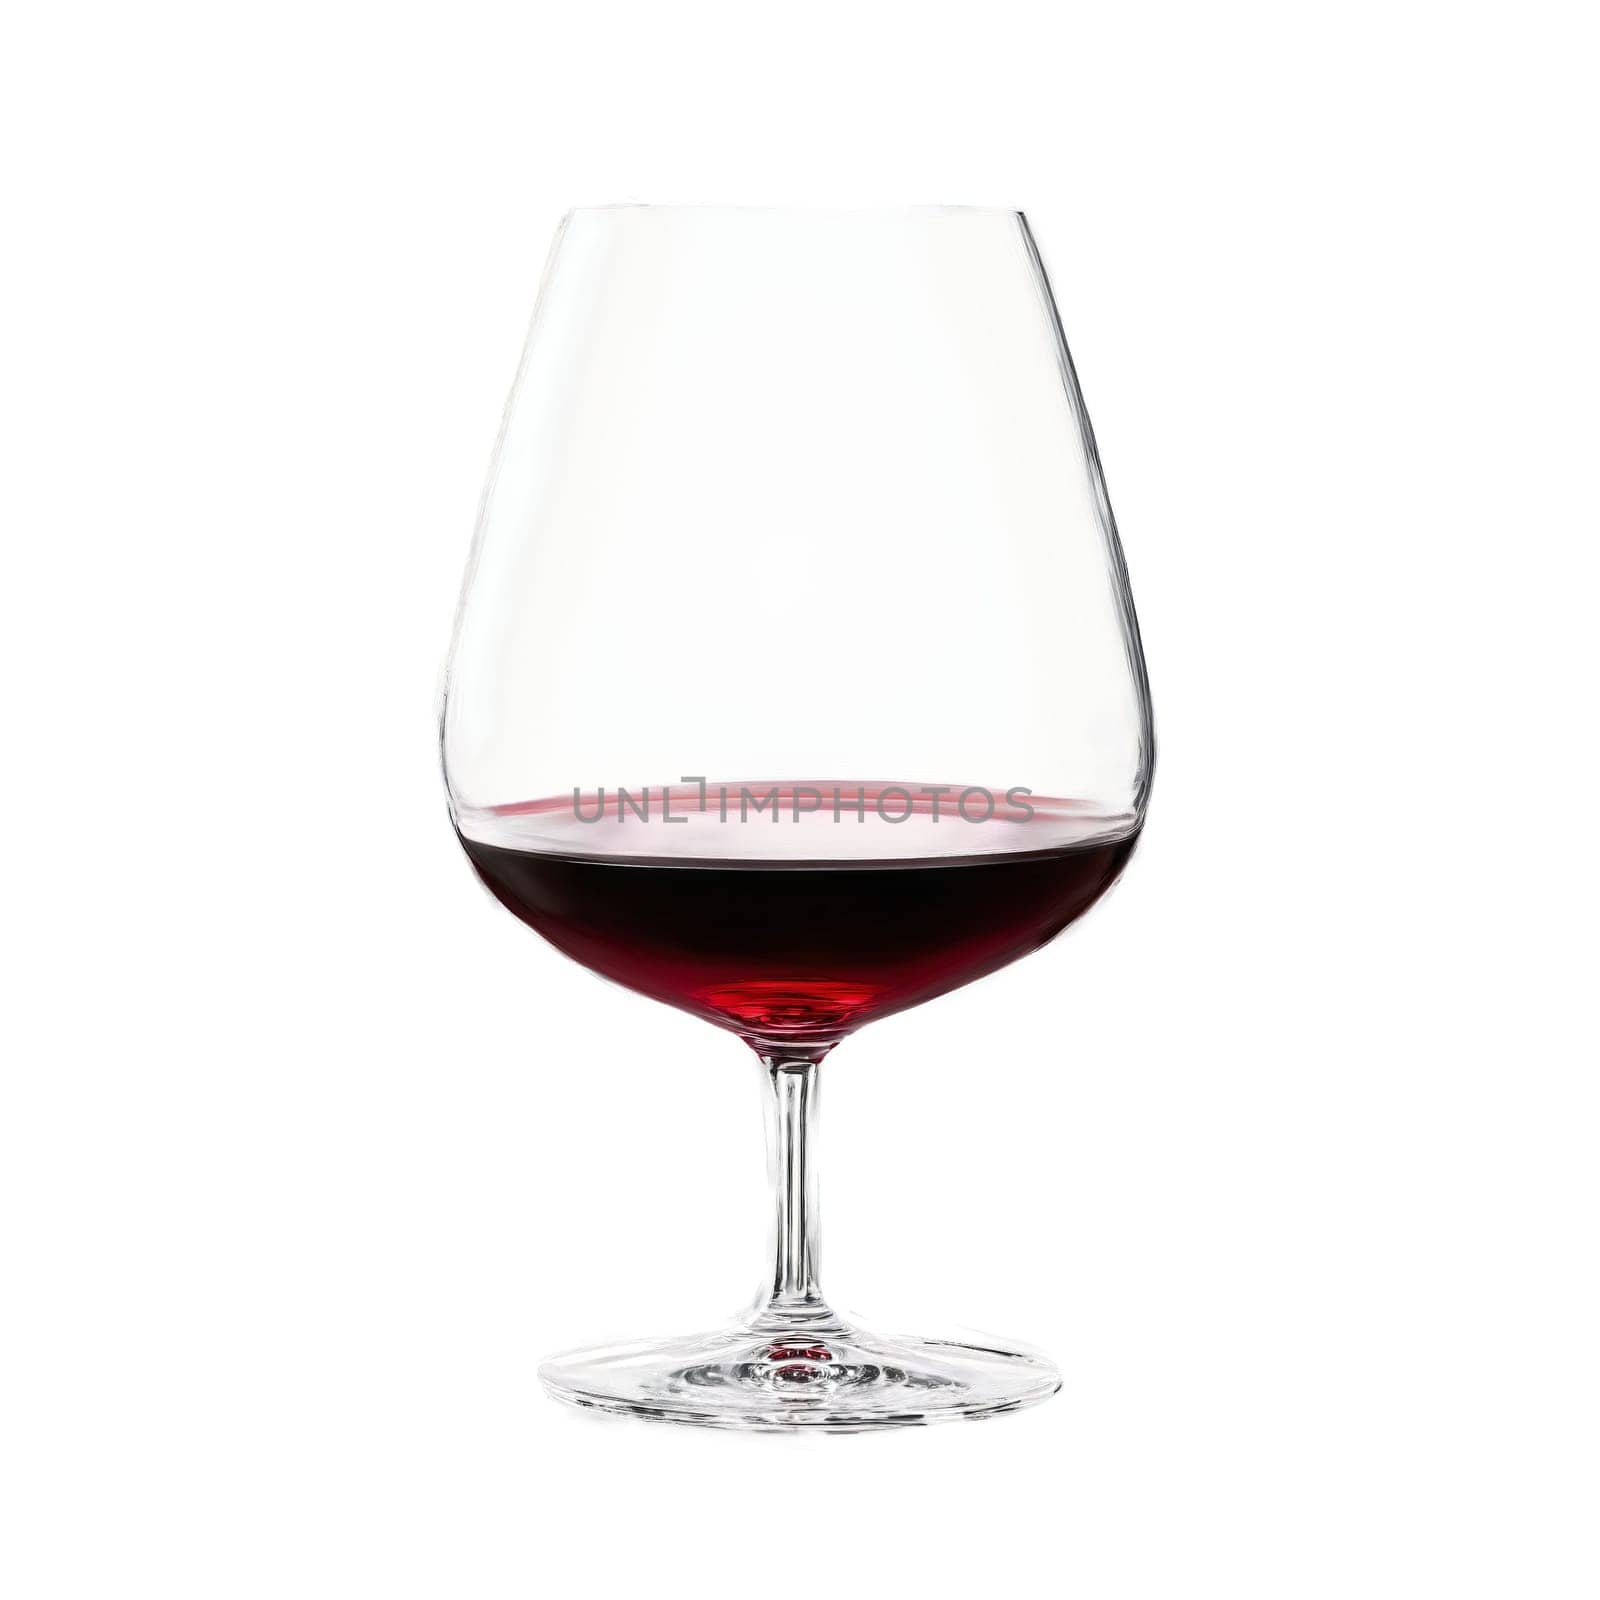 Rogaska Expert Pinot Noir glass handmade crystal wide rounded bowl brick red wine catching the by panophotograph